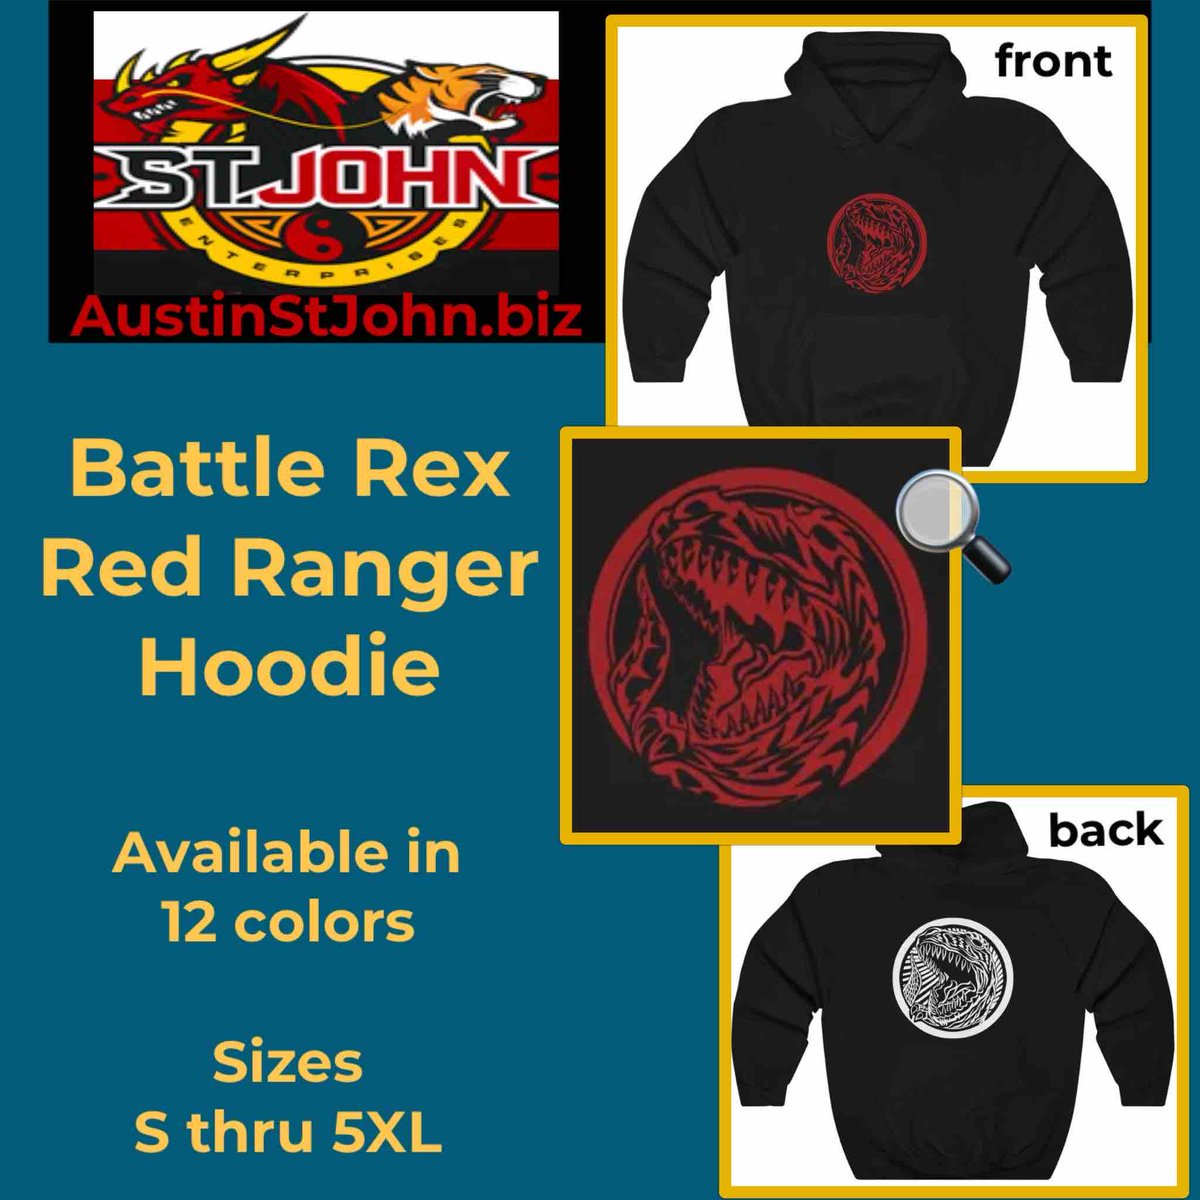 Spring is in the air and the nights can still get cool. Check out the Battle Rex hoodie to keep you warm. austinstjohn.biz. #battlerex #powerrangers